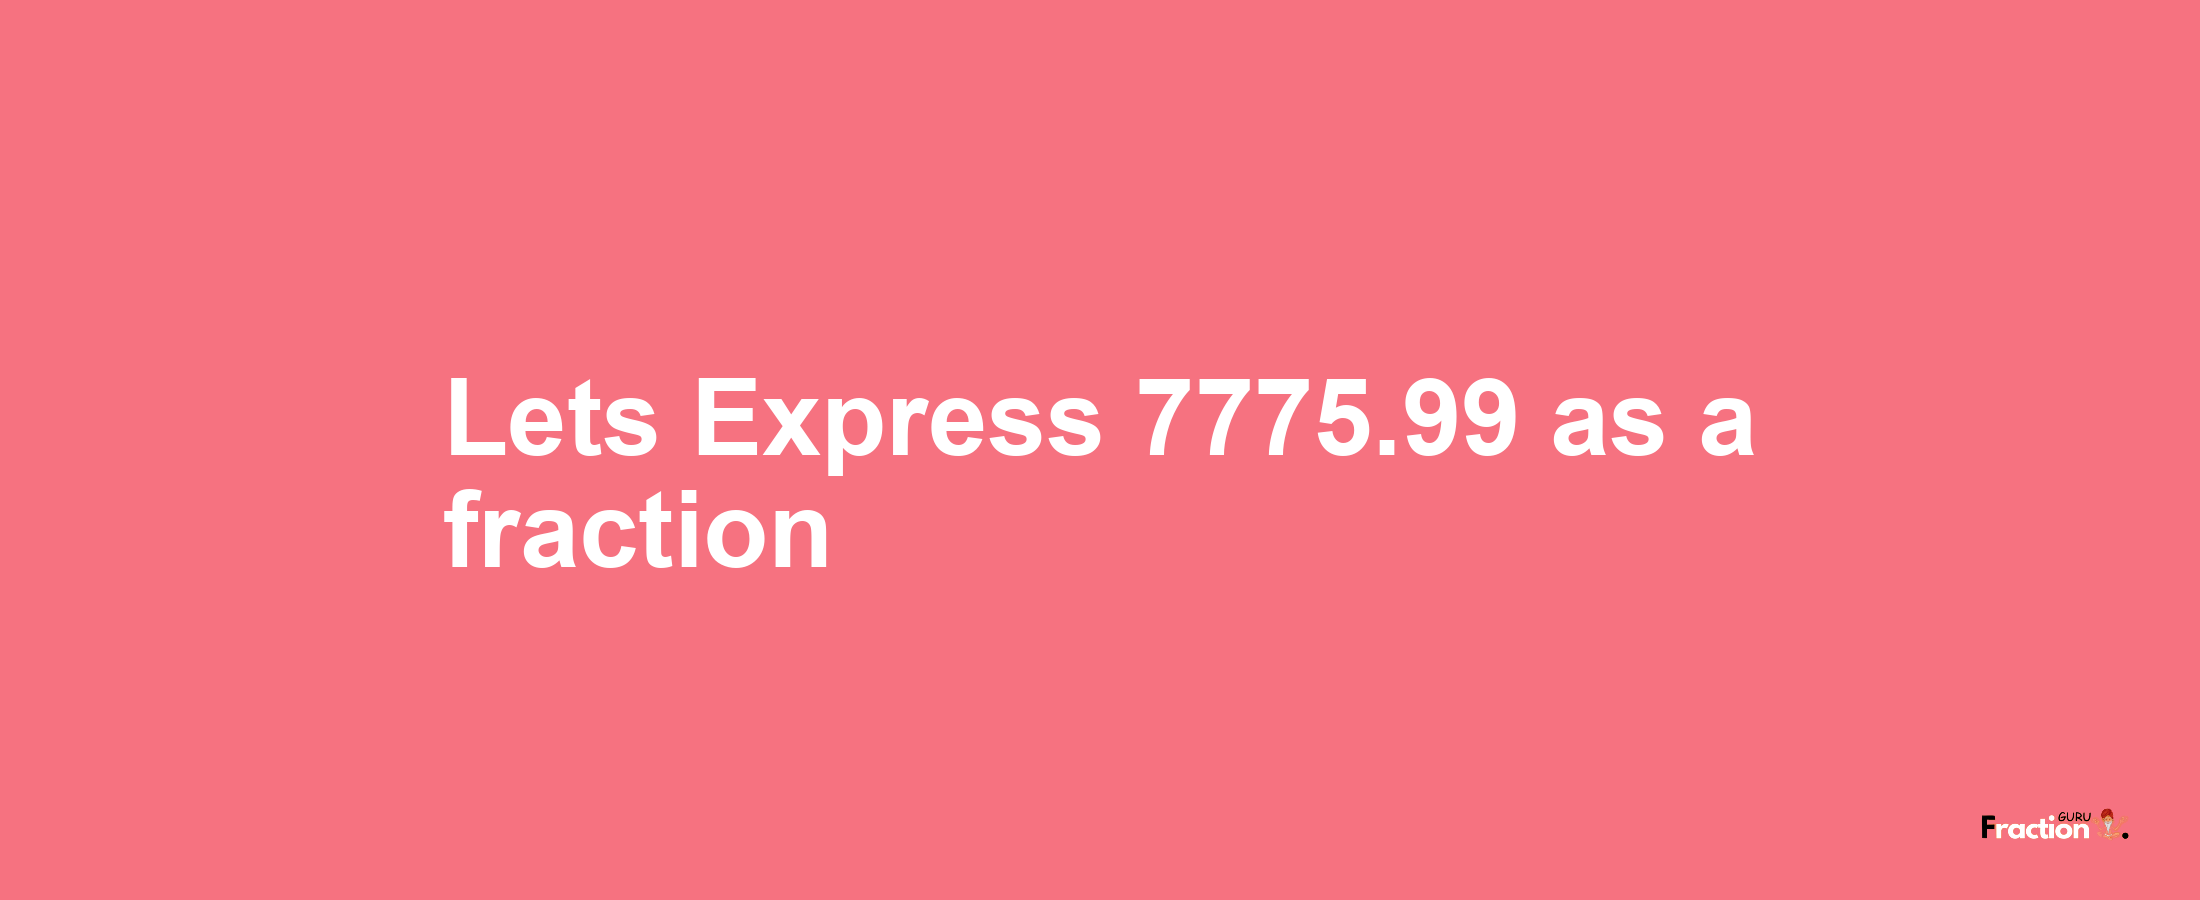 Lets Express 7775.99 as afraction